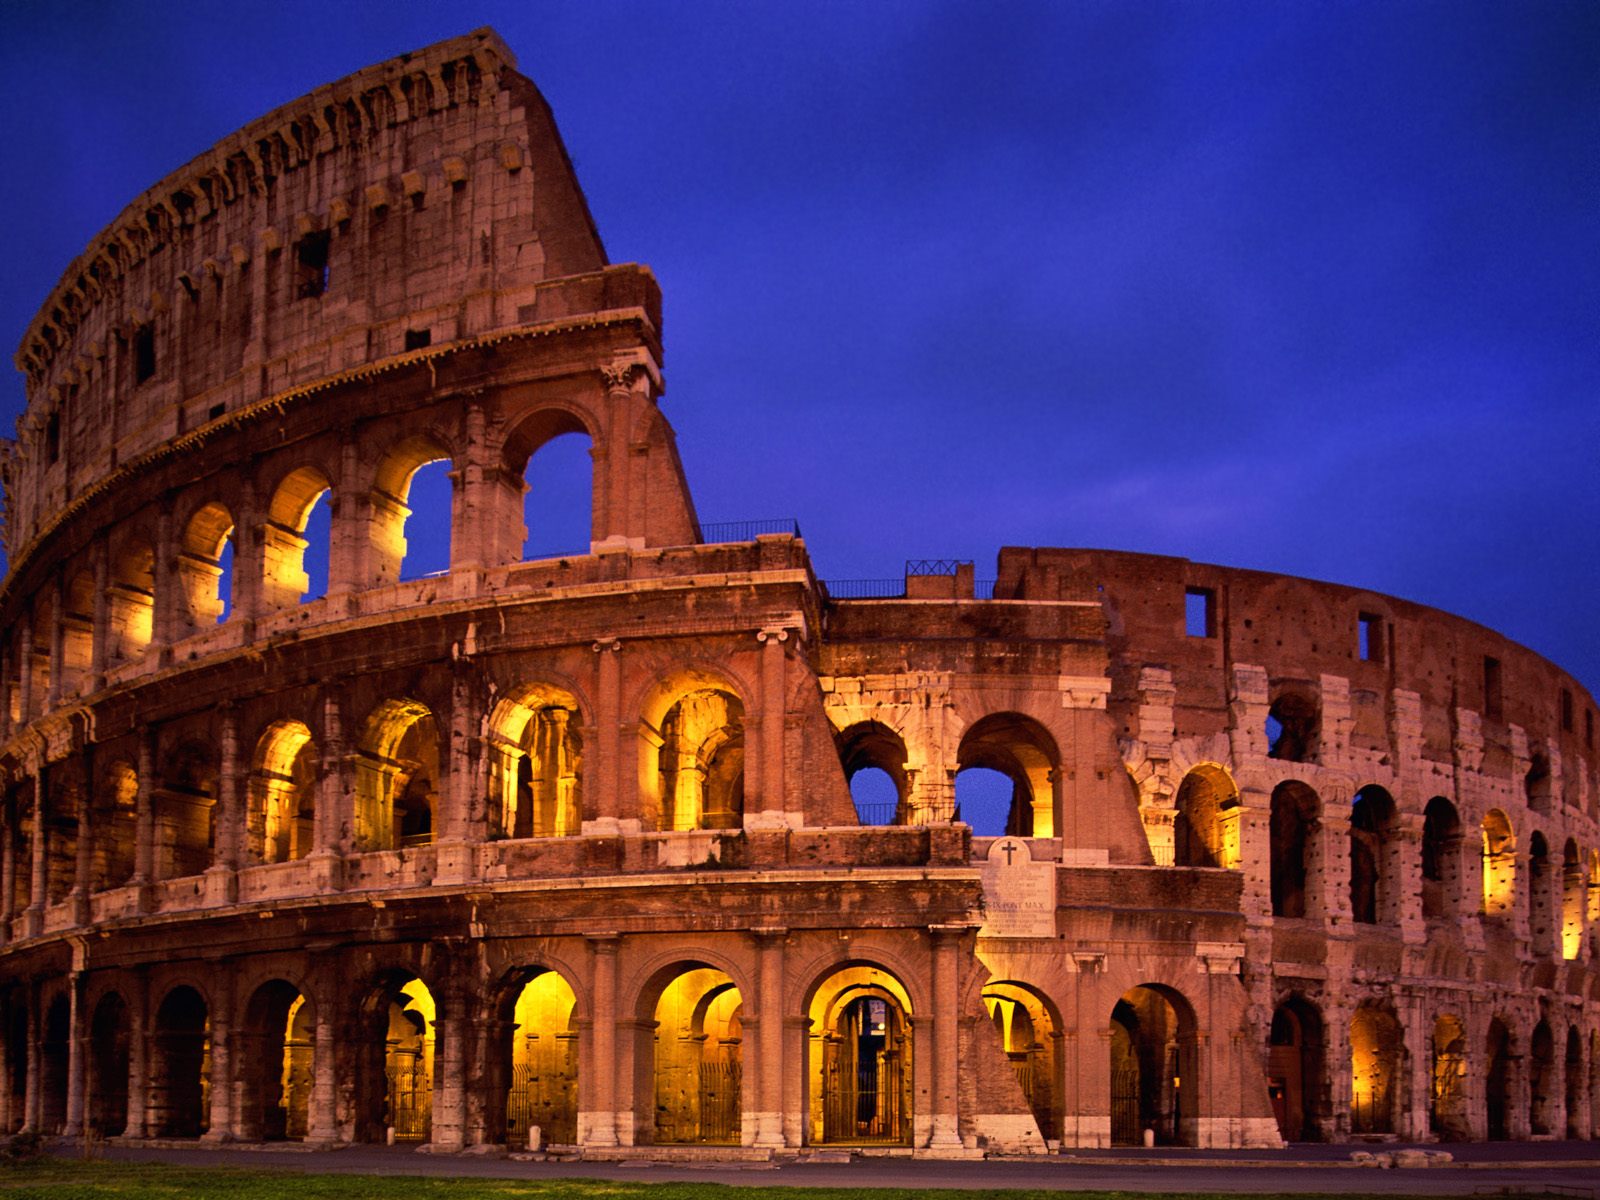 The Colosseum Rome Italy Wallpaper - Colosseum , HD Wallpaper & Backgrounds